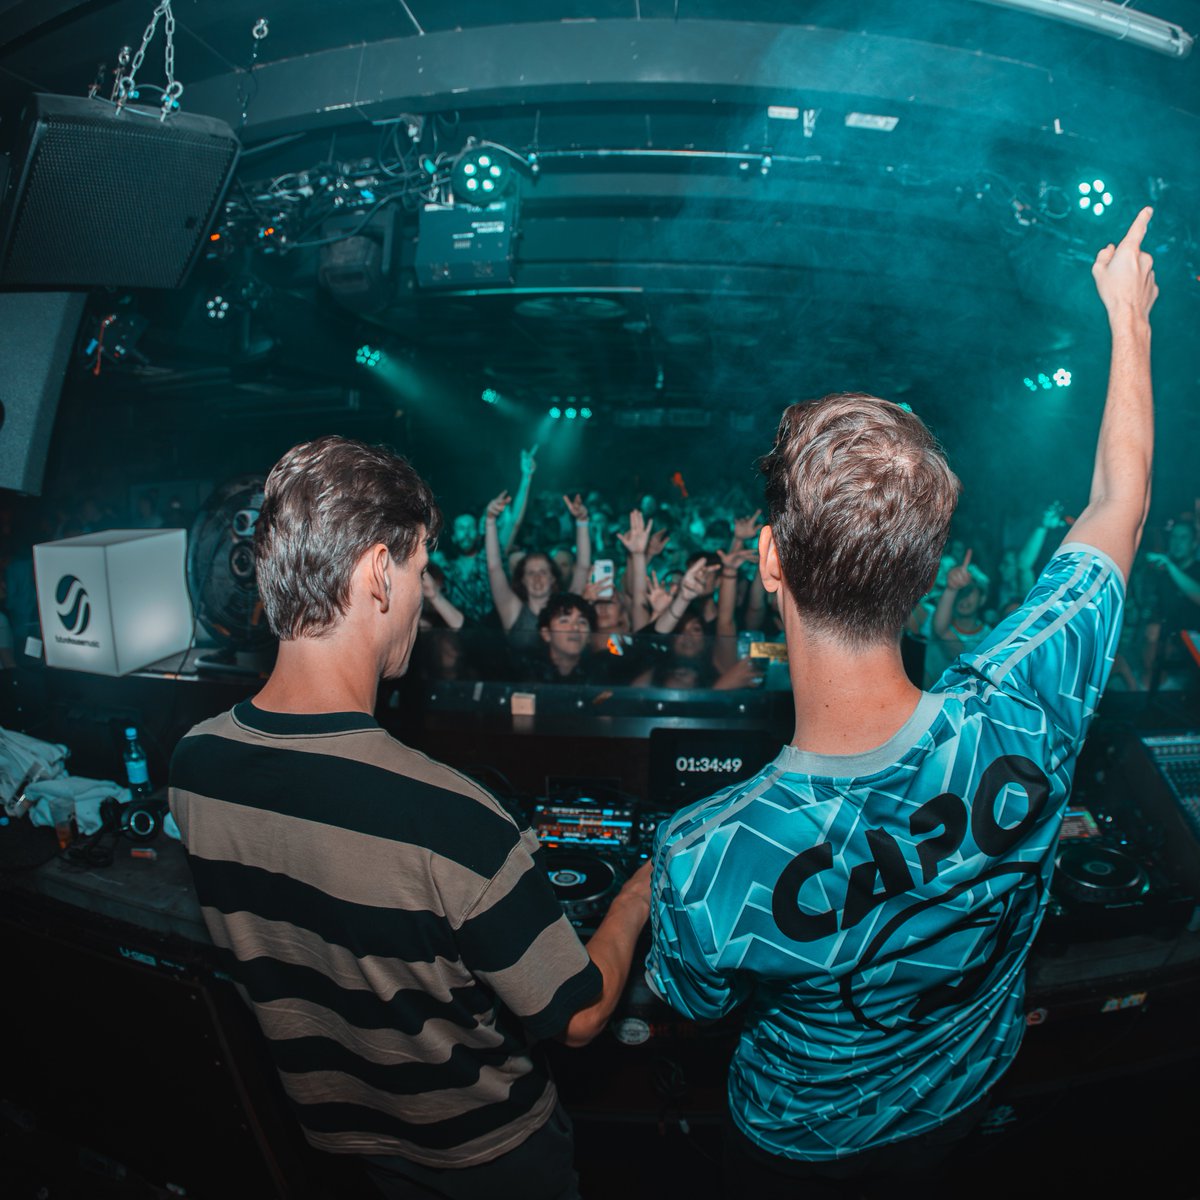 Take a trip down memory lane and go back to 2022 at the @bootshaus_club FHM Party, where @mrbeltandwezol ignited the stage! 💥 #ThrowbackThursdays